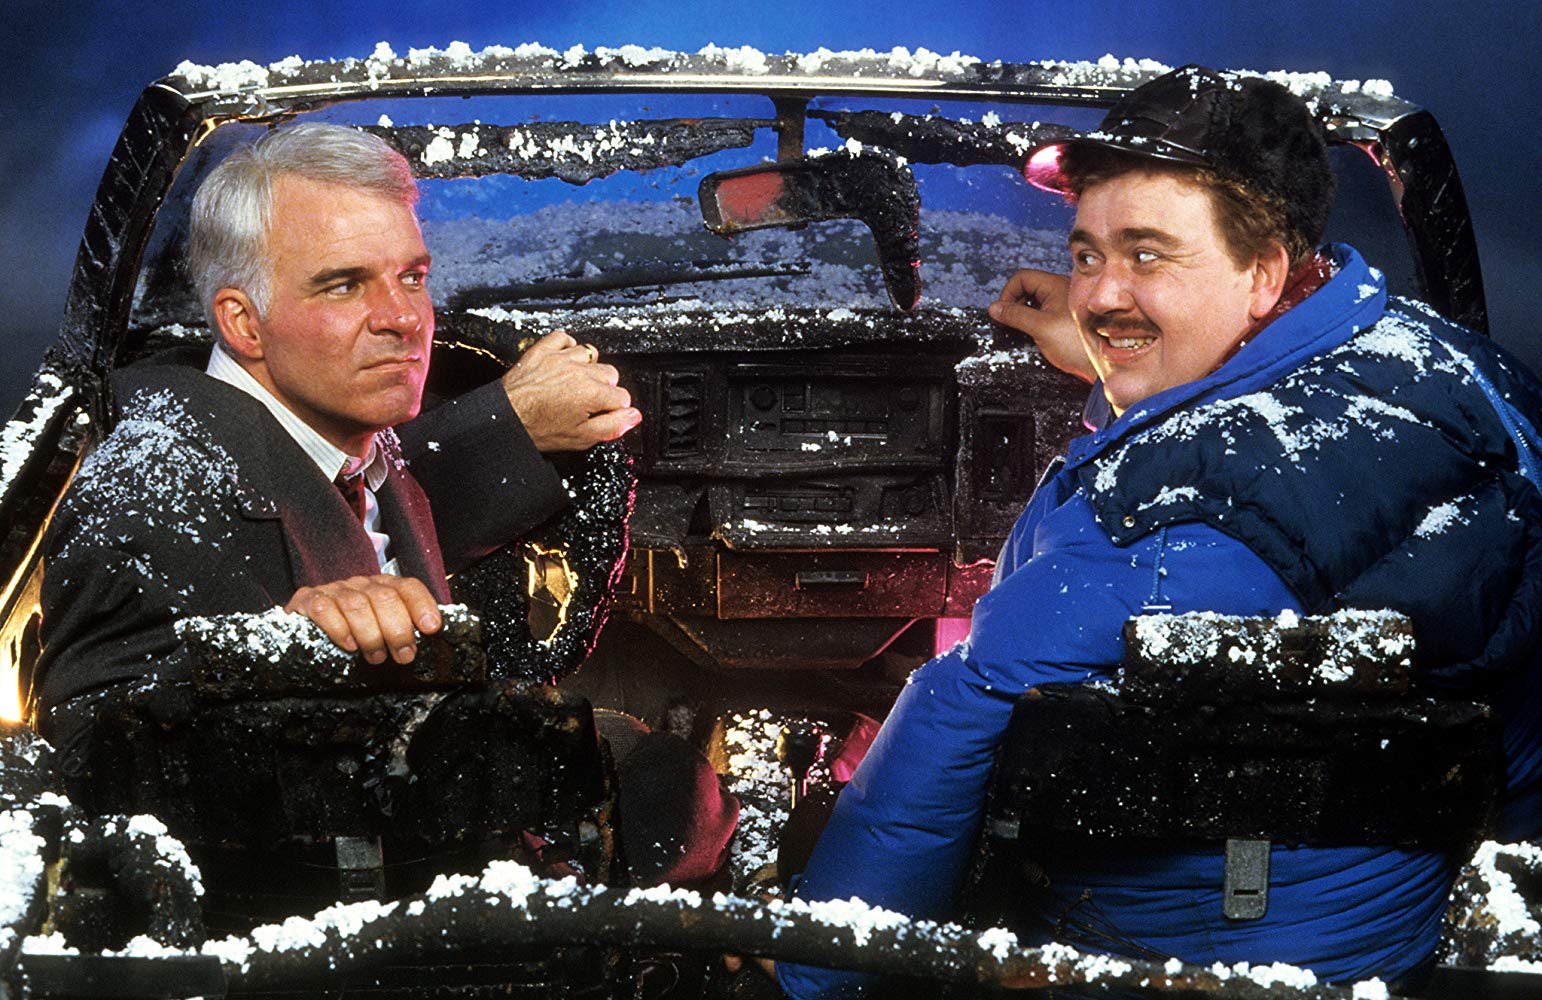 Steve Martin and John Candy in Planes, Trains & Automobiles (1987). Planes, Trains and Automobiles